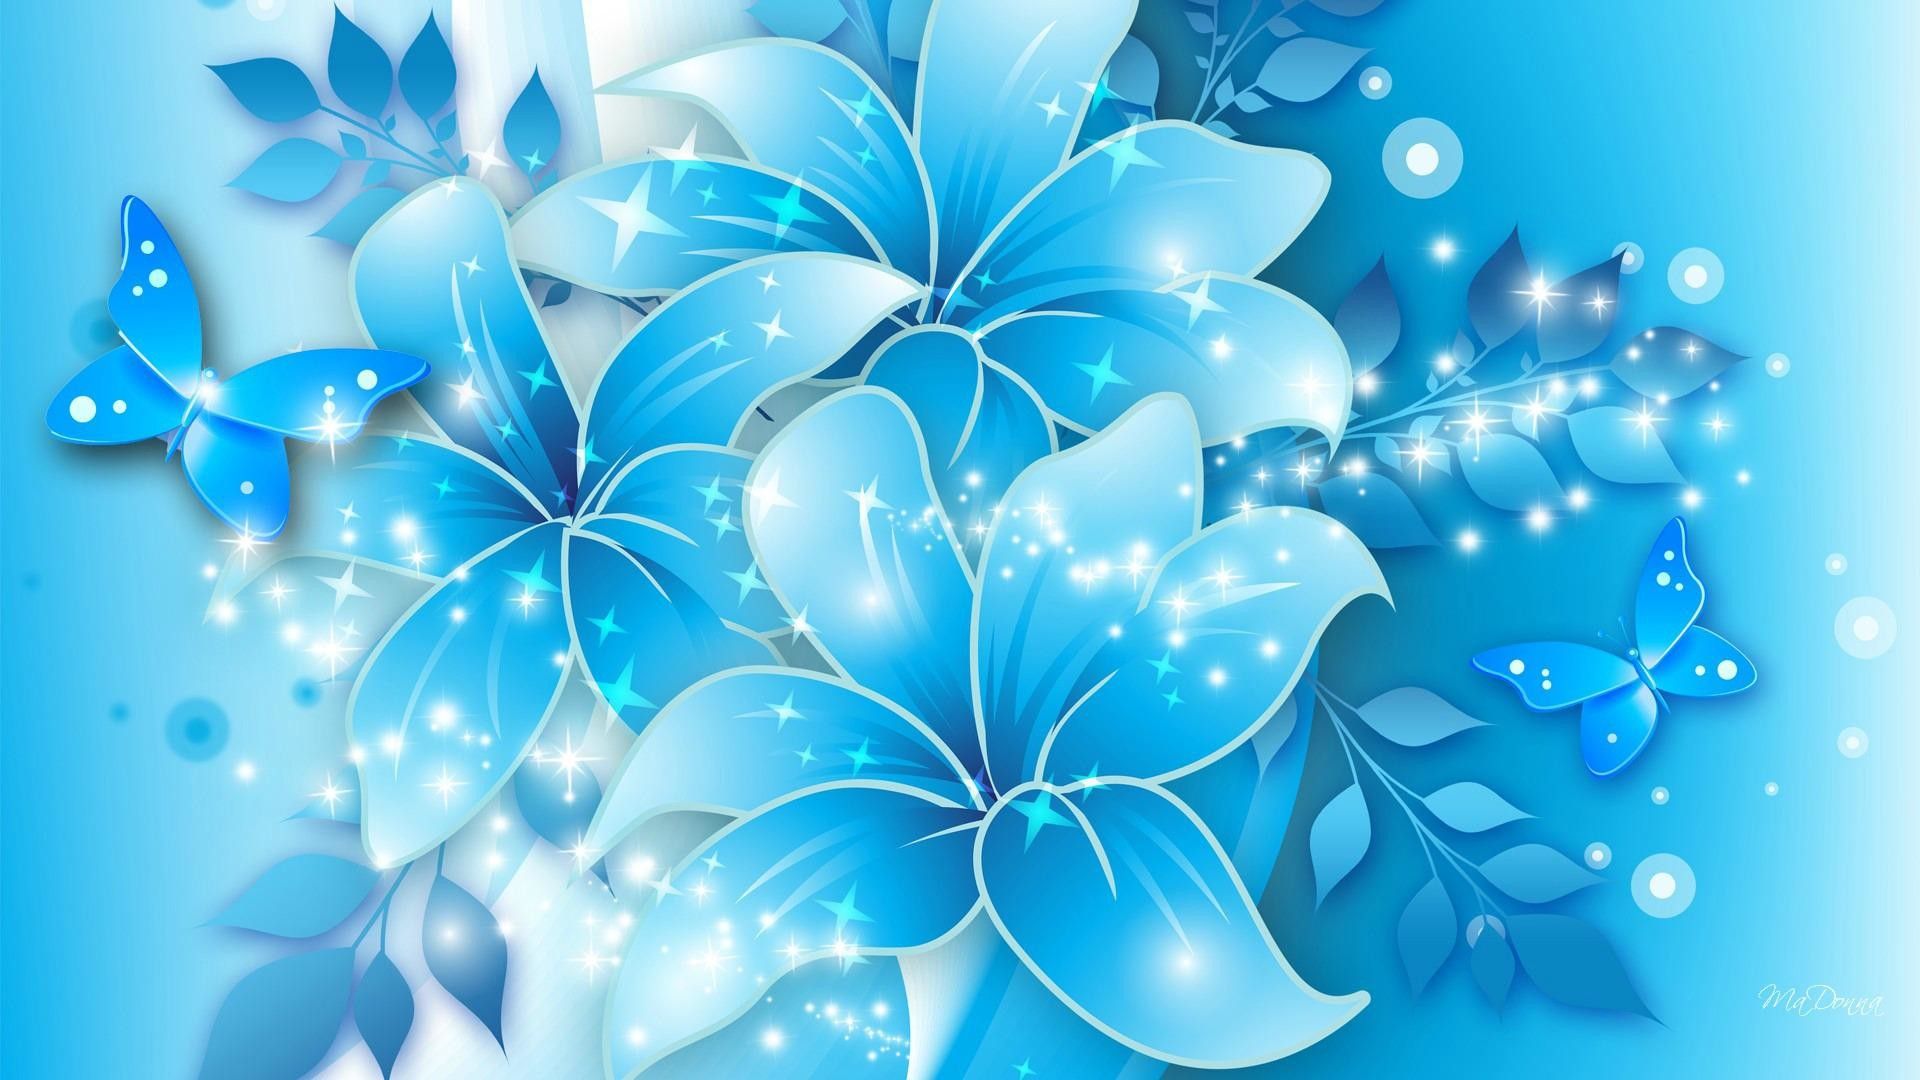 Turquoise Flowers Wallpapers